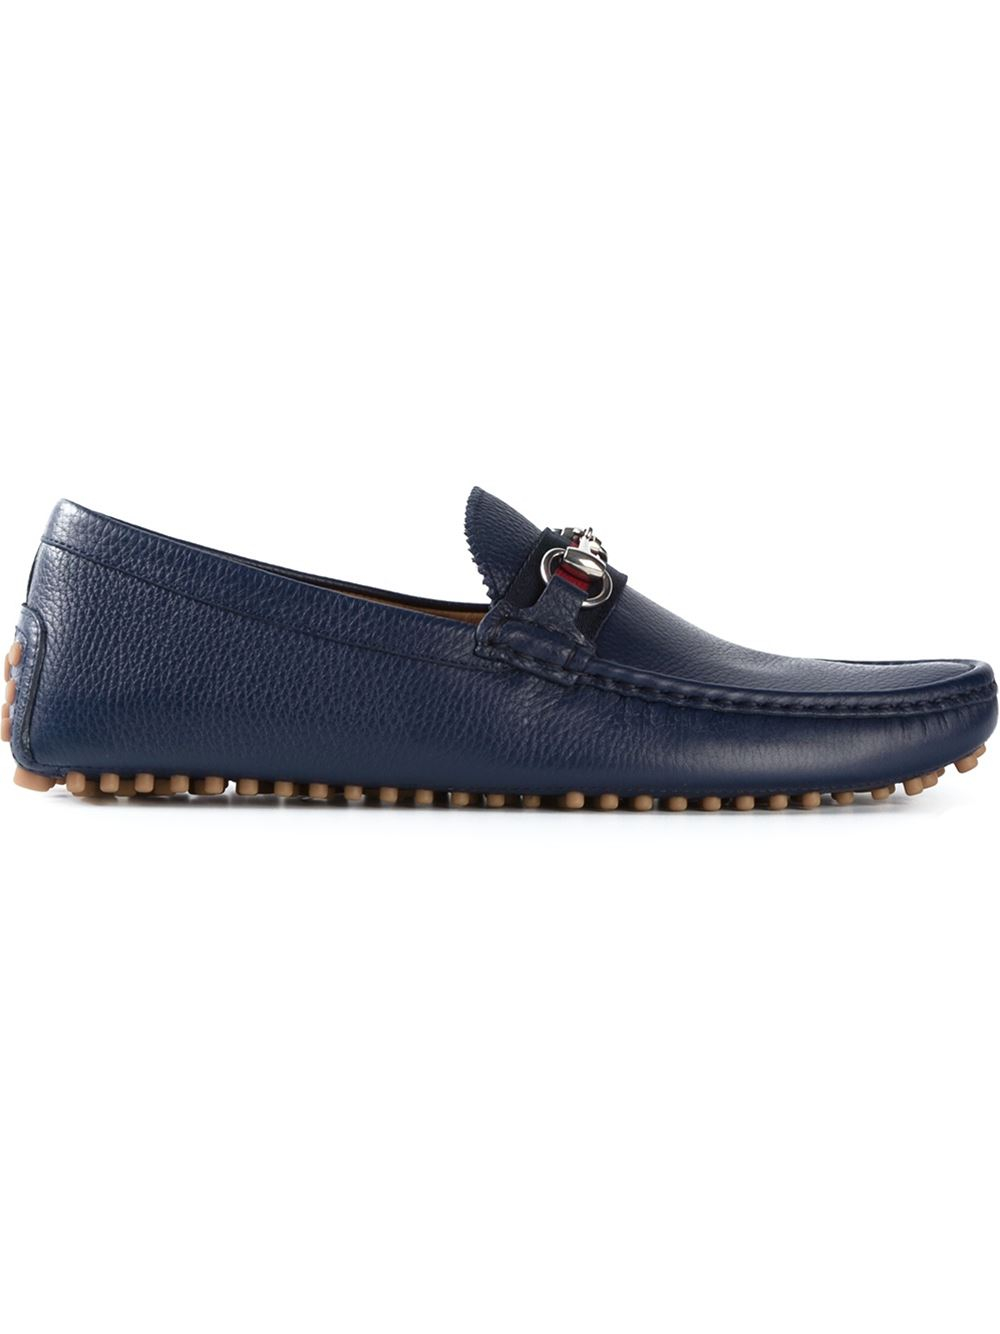 Gucci Driving Shoes in Blue for Men - Lyst